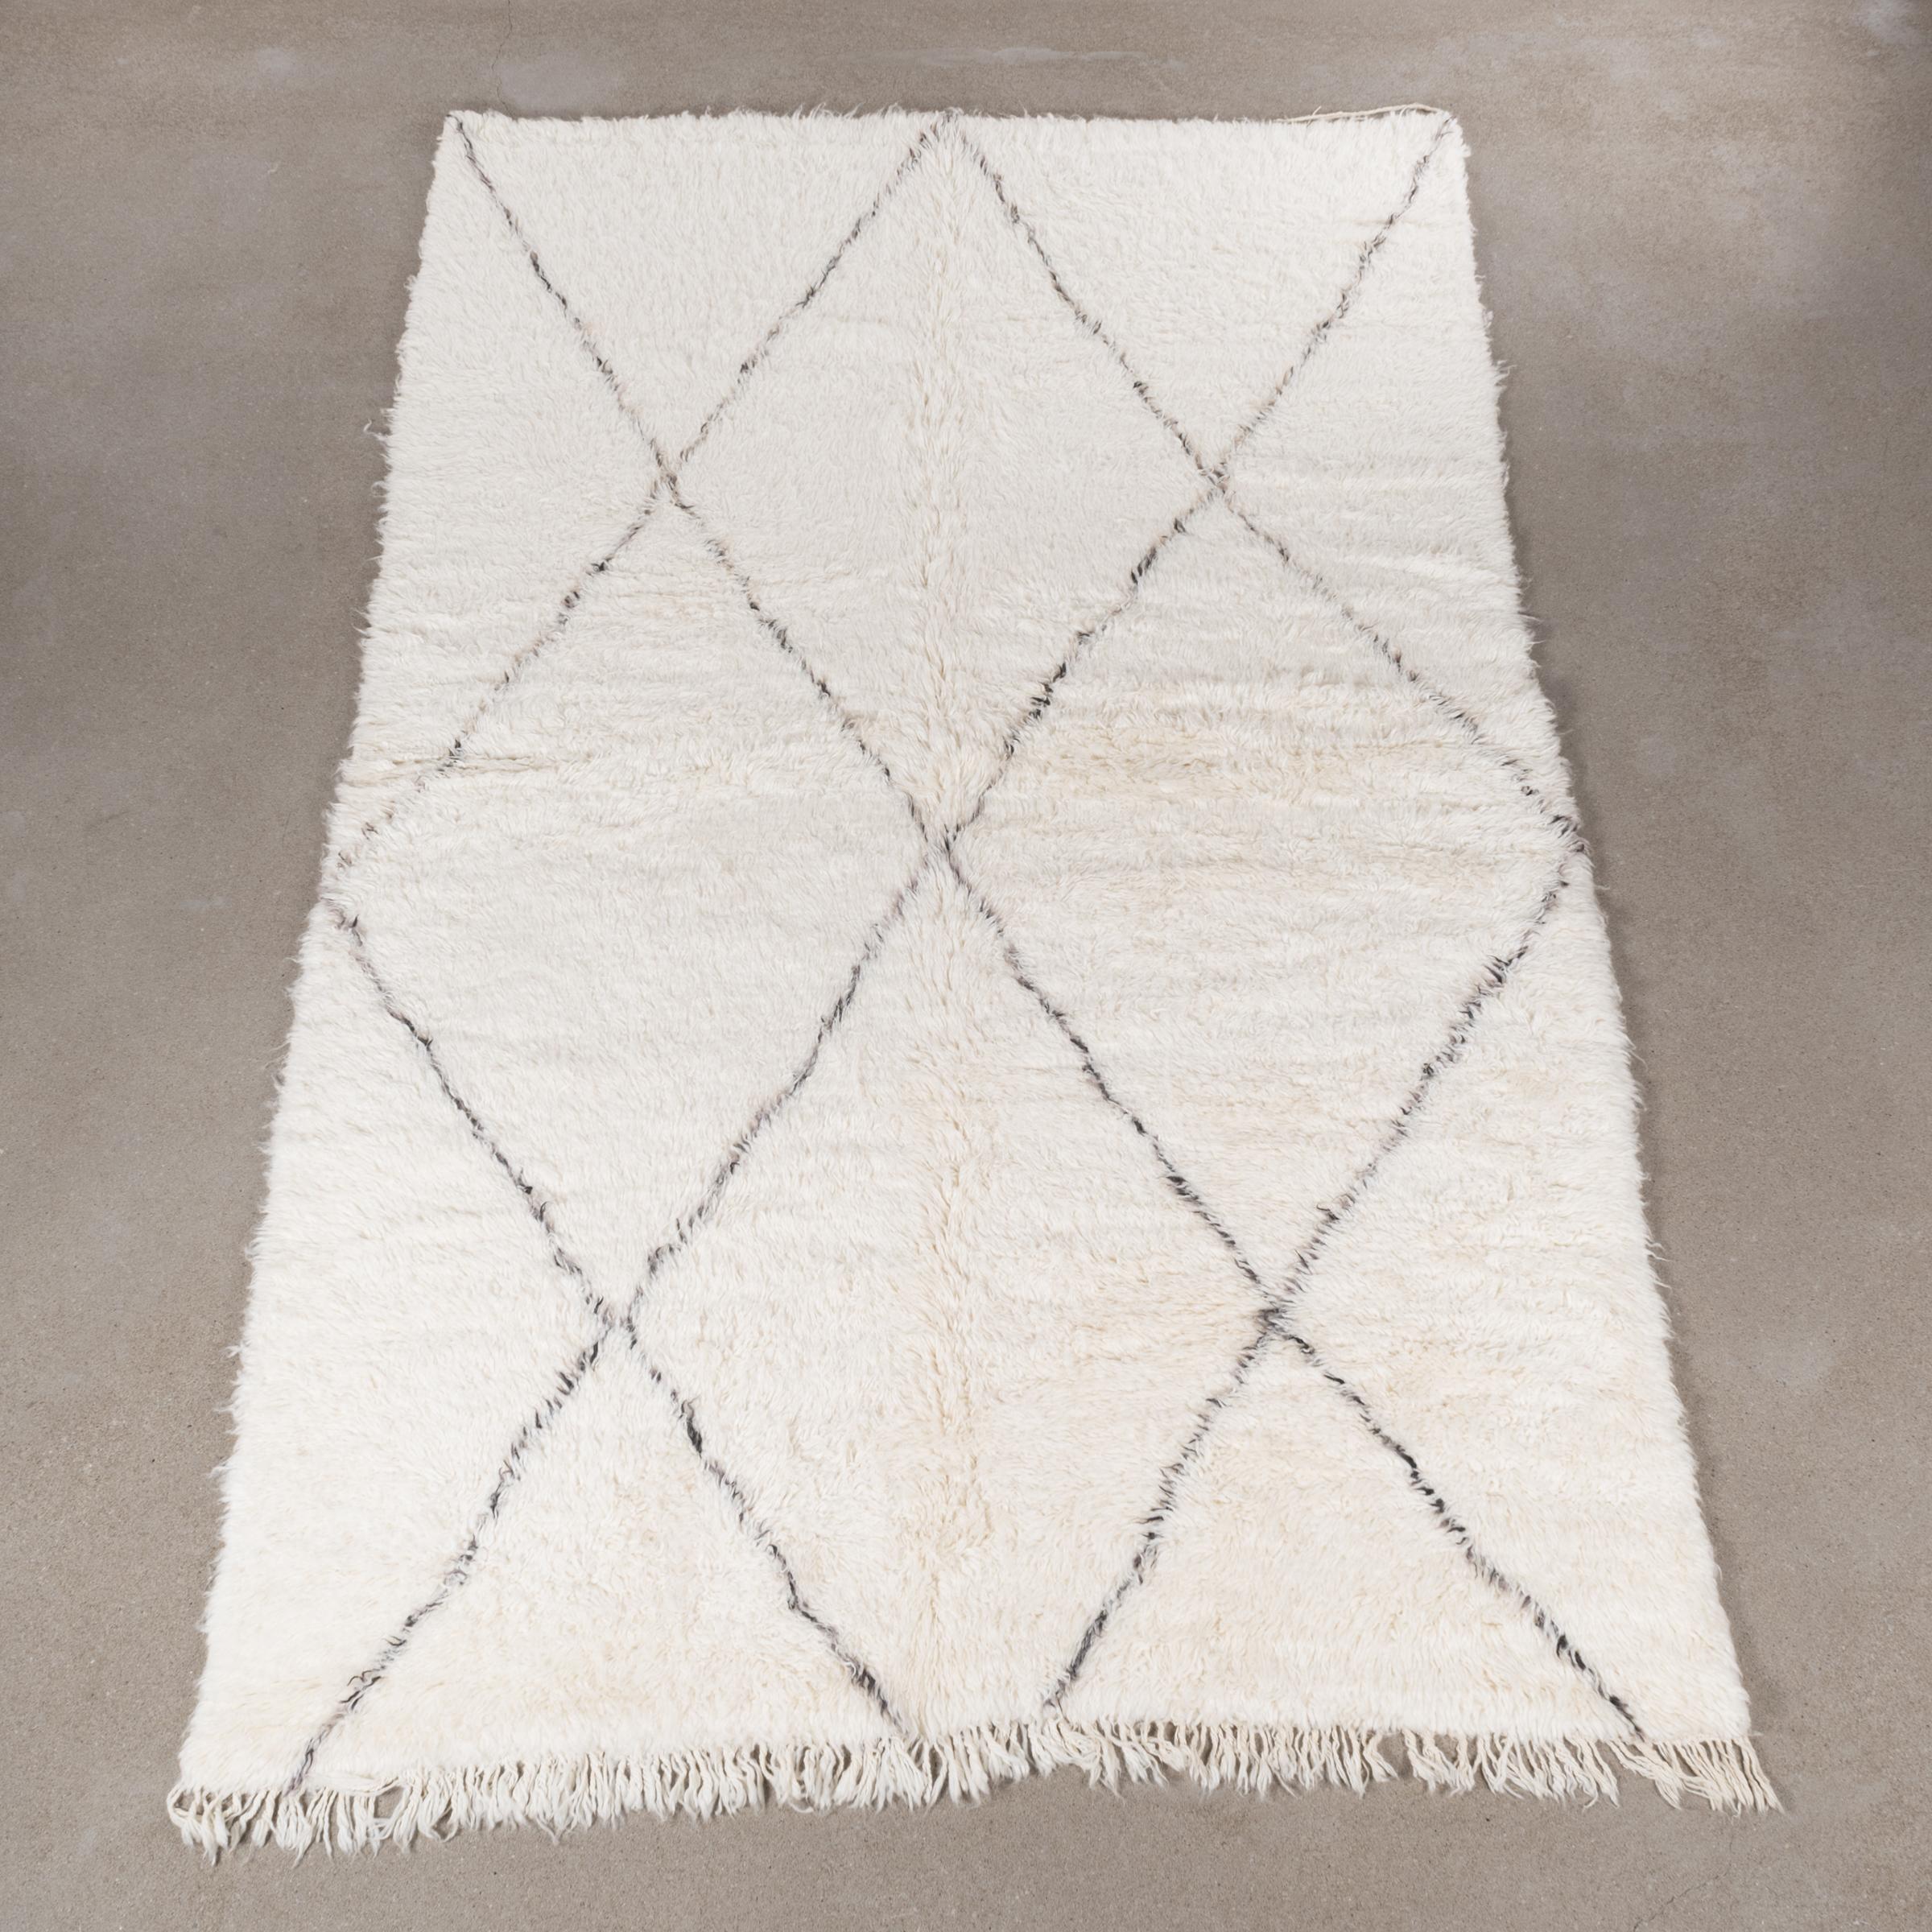 This vintage Beni Ourain rug is personally selected in Morocco and has a soft ivory color due to the wool's natural color and are accompanied by dark grey stripes. The rugs are named after the Berber village 'Beni Ourain' in the mid-Atlas mountain